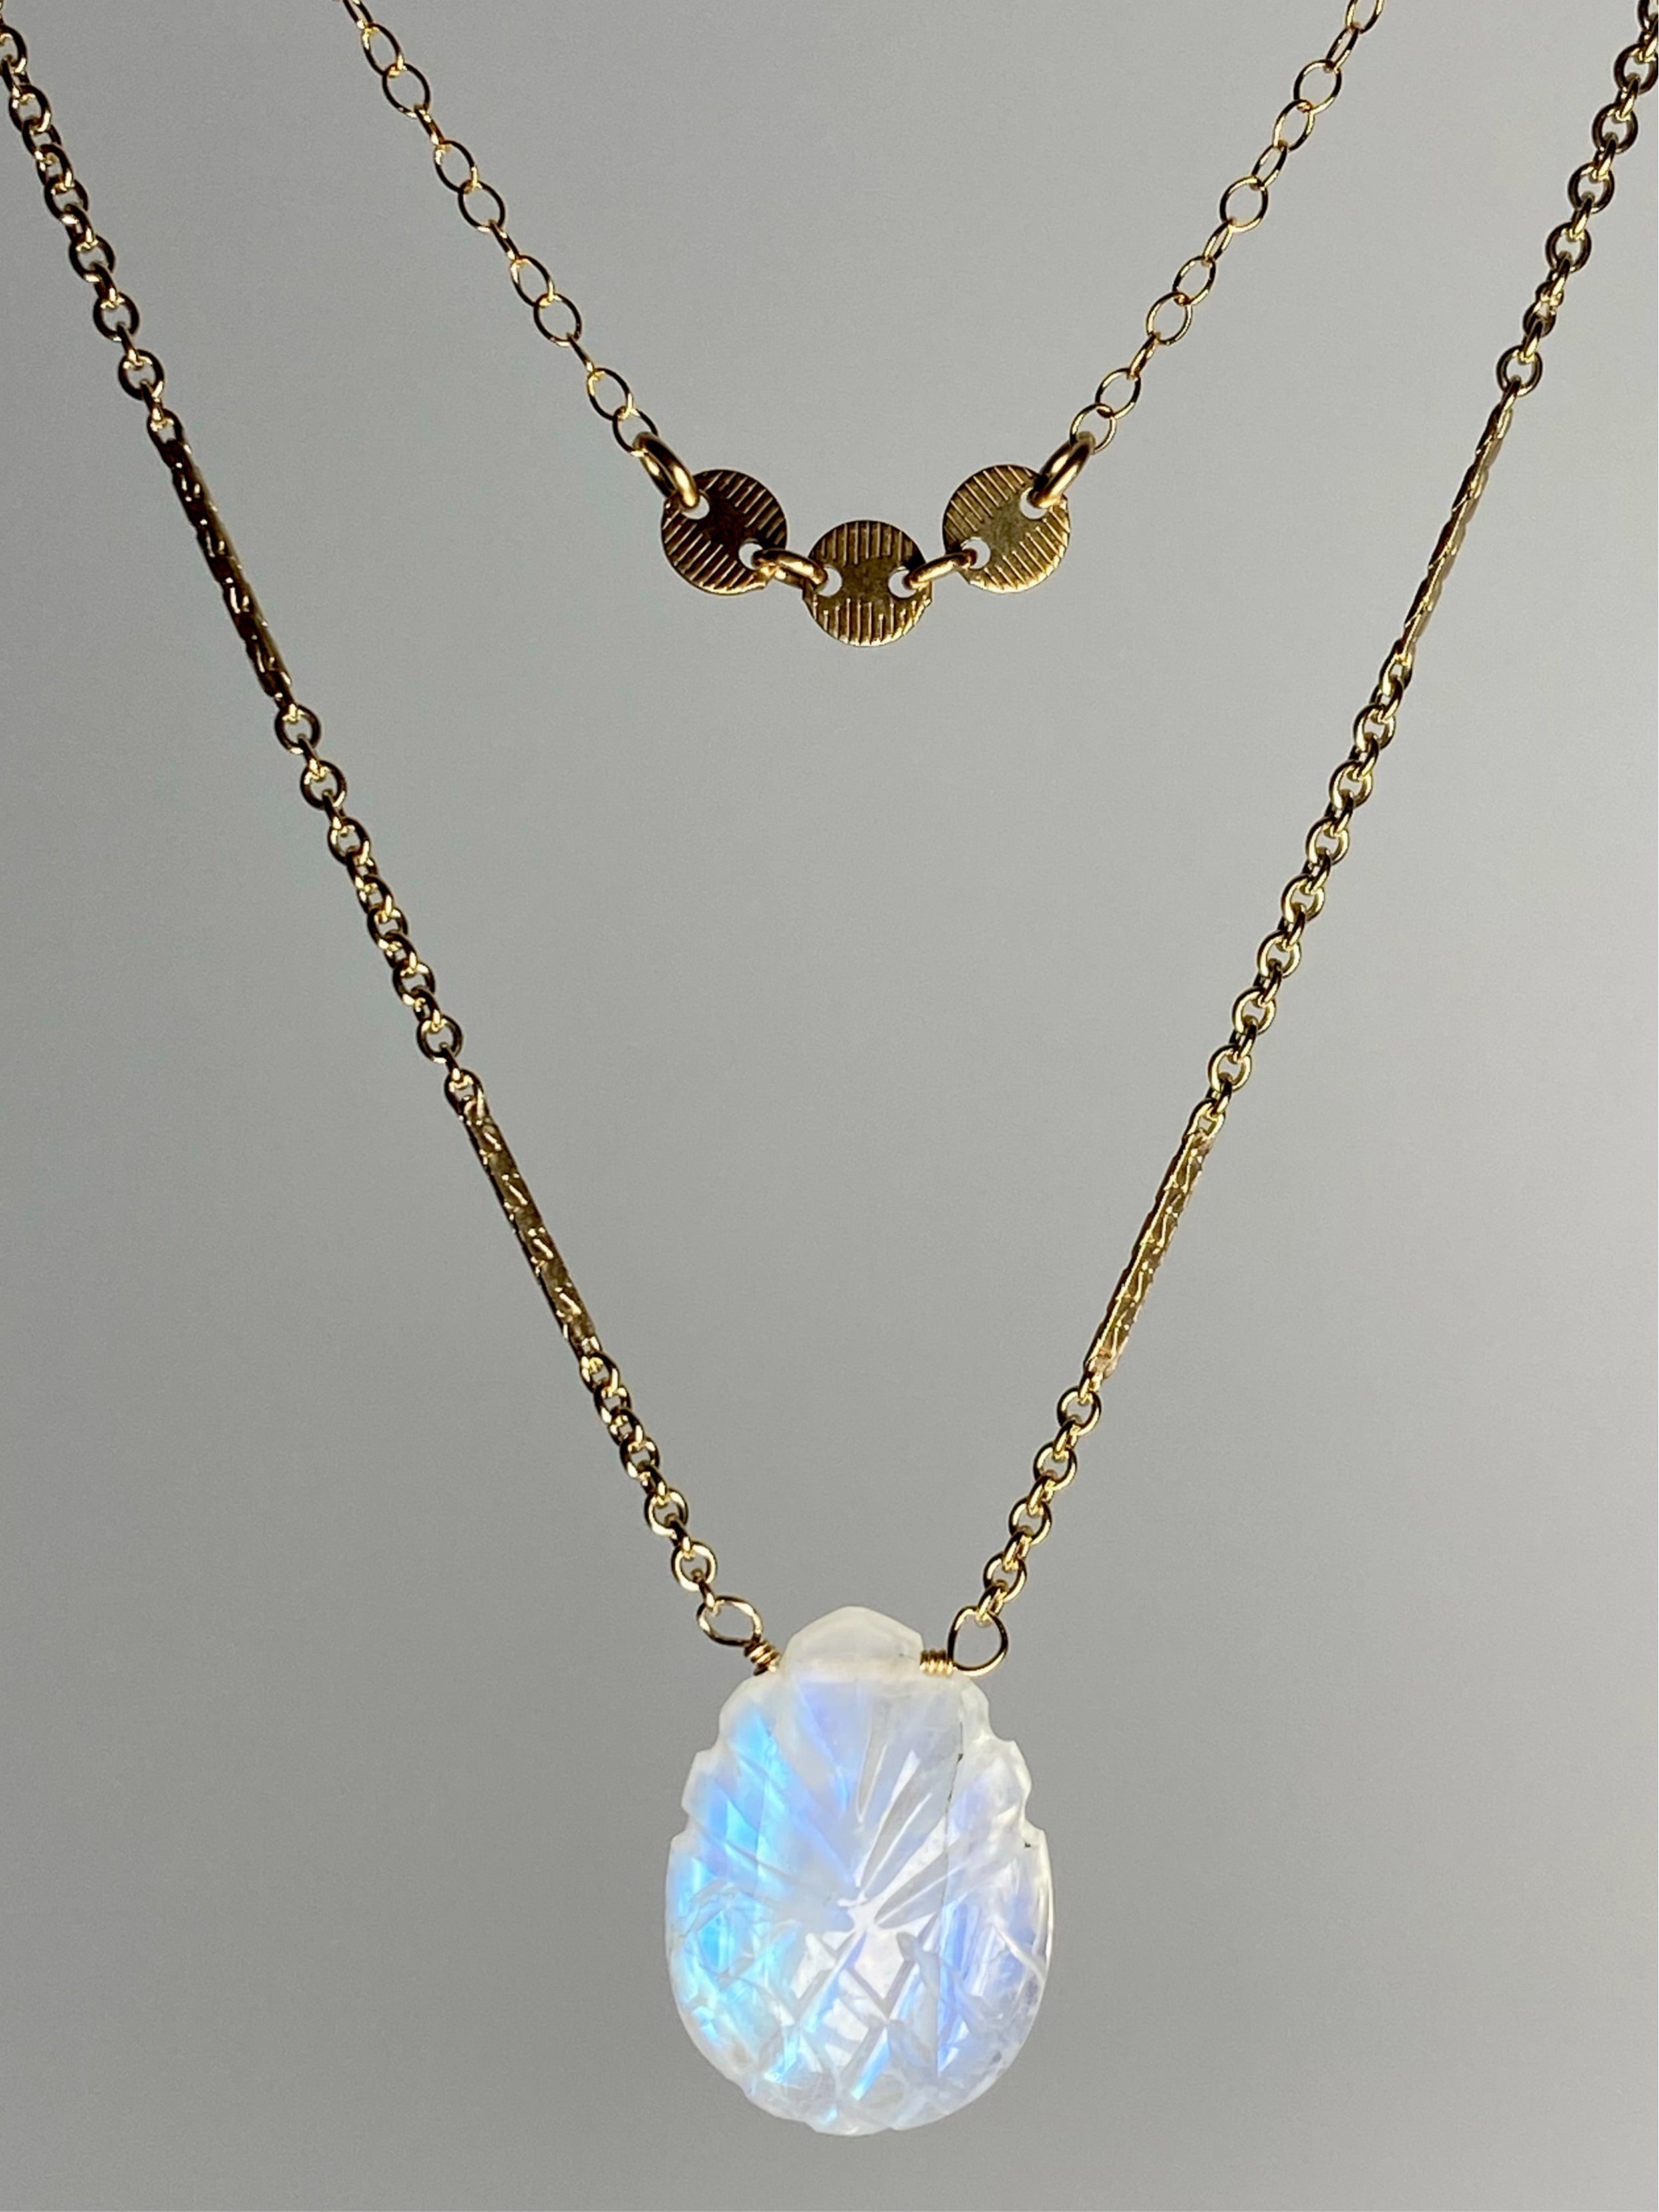 Moonstone Pineapple Necklace